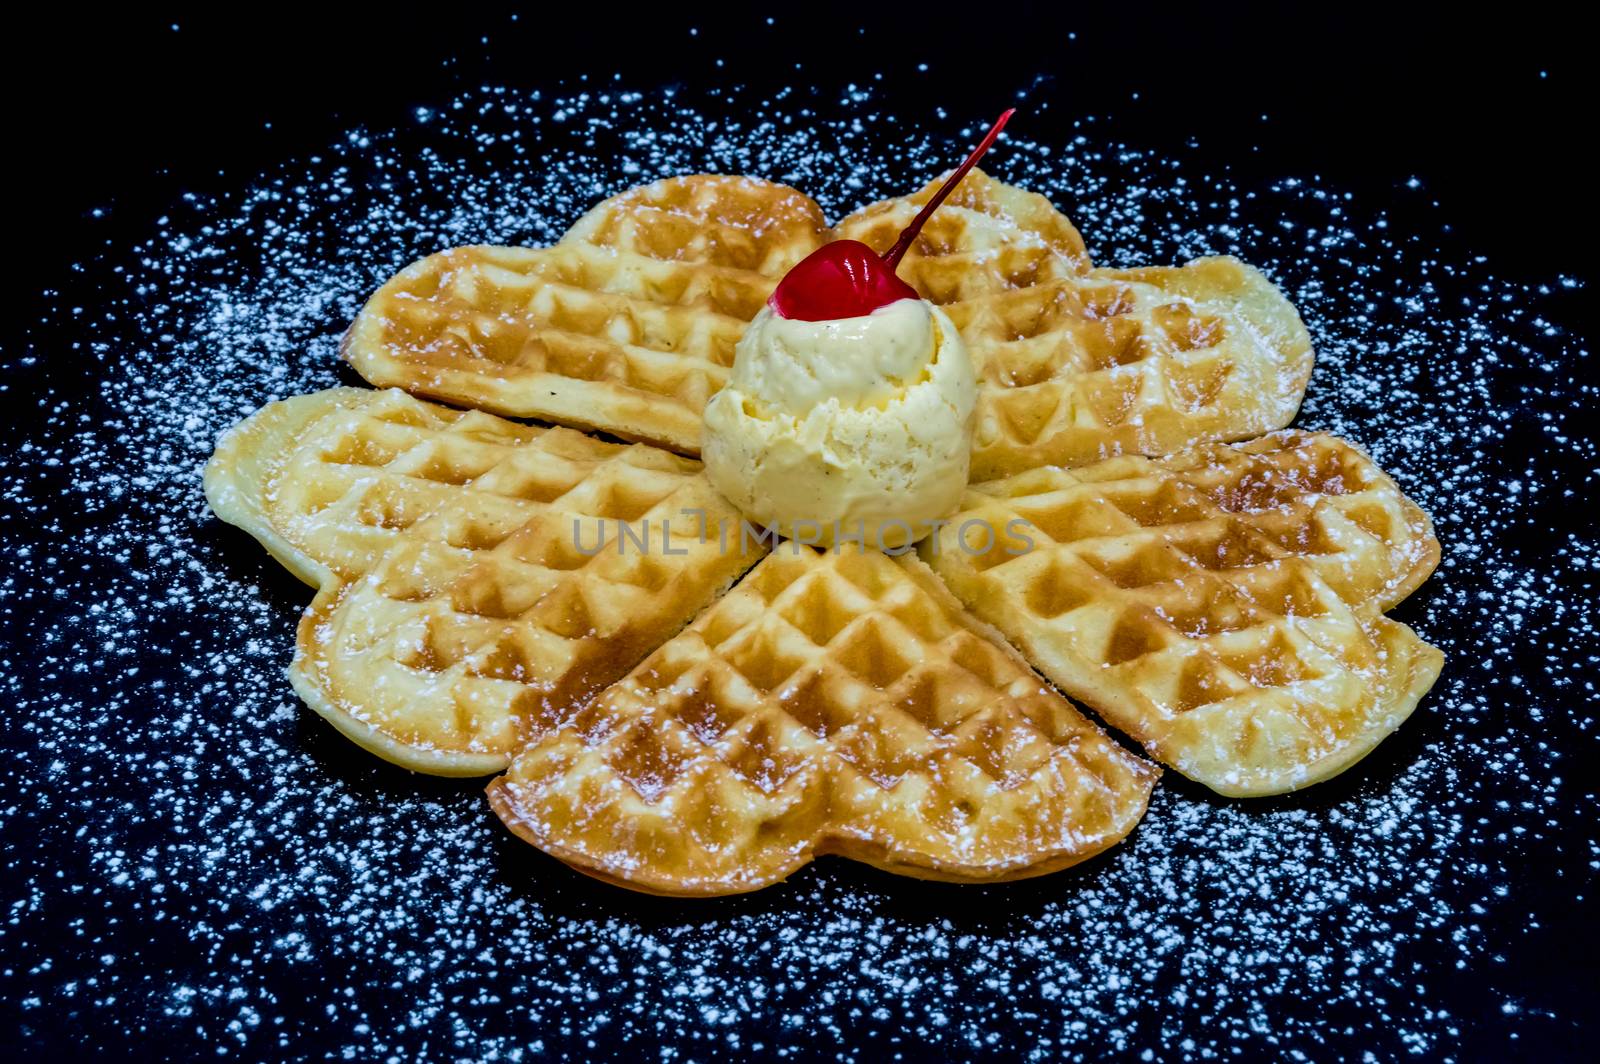 Homemade waffles with powdered sugar, a scoop of vanilla ice cream and a cherry on a black background, isolated image of food.